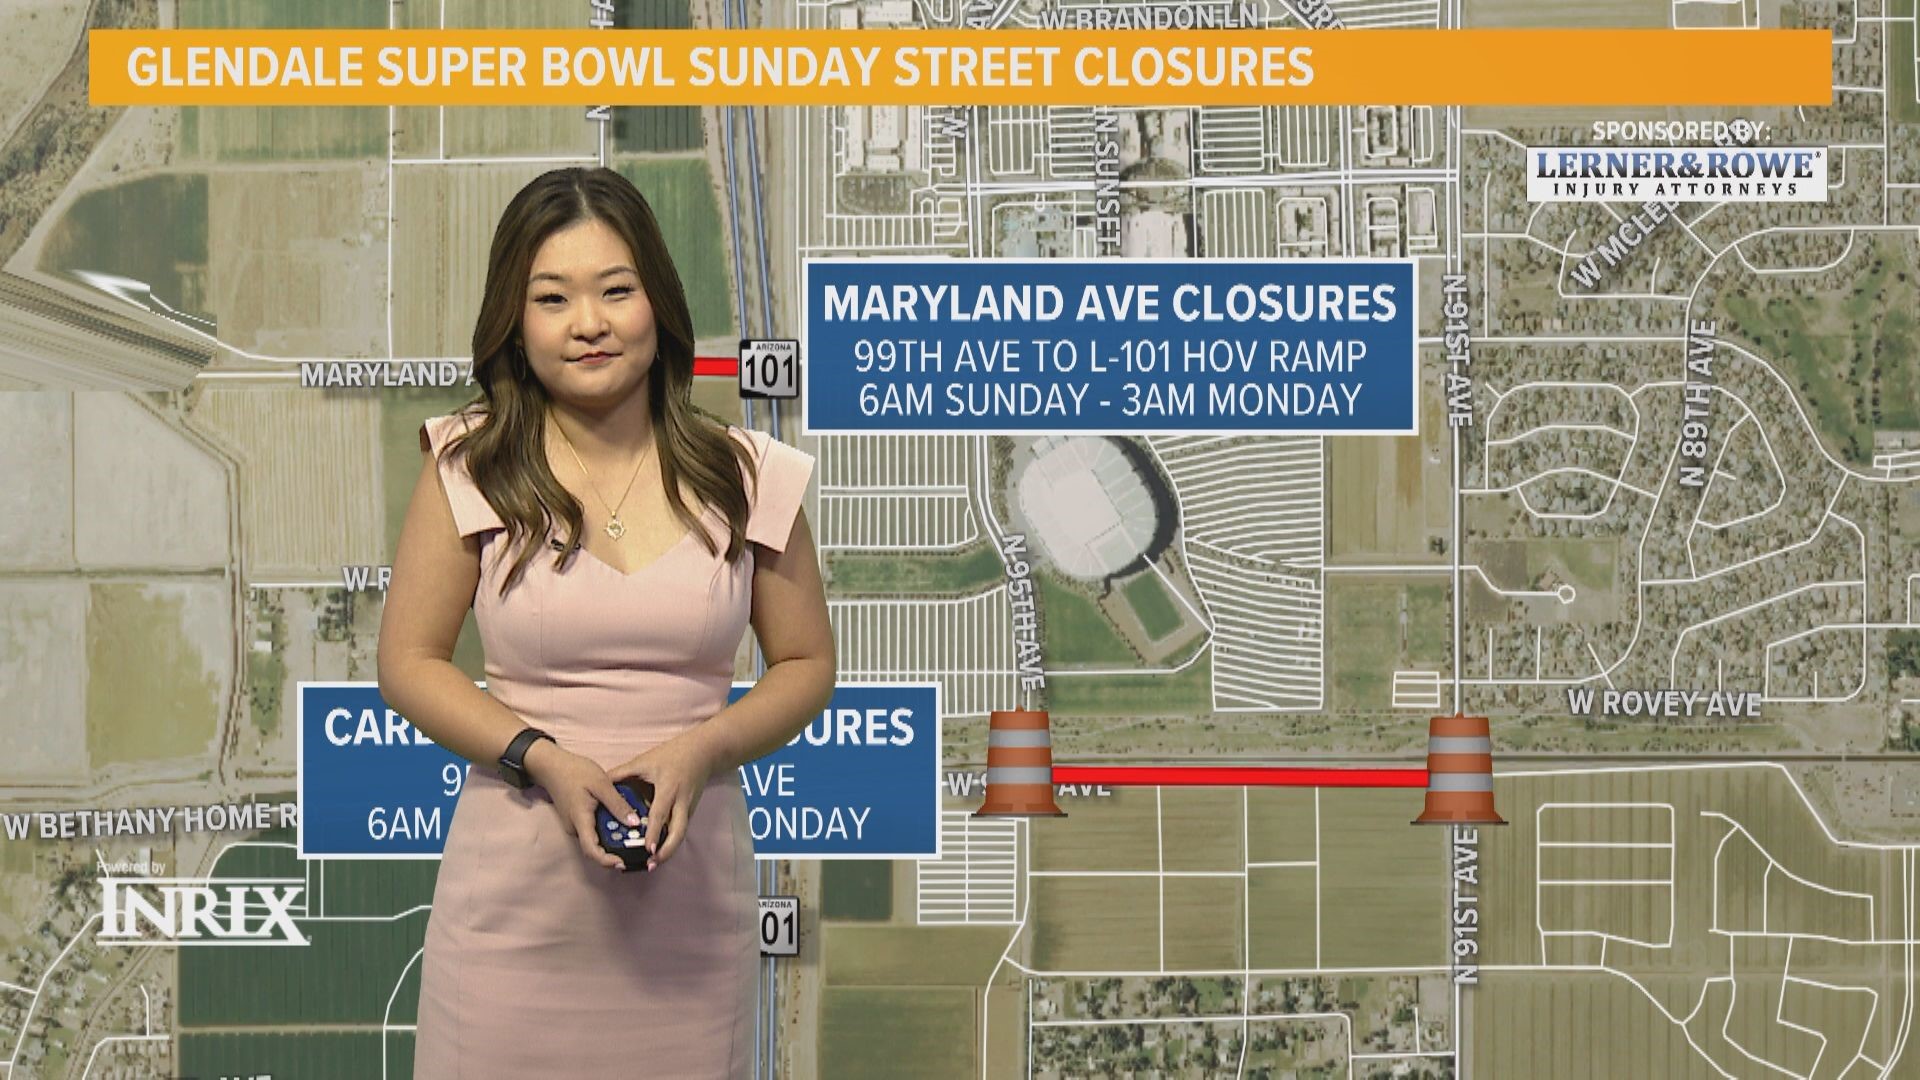 Stella Sun gives us a breakdown of what you can expect on Valley roads during Super Bowl weekend.